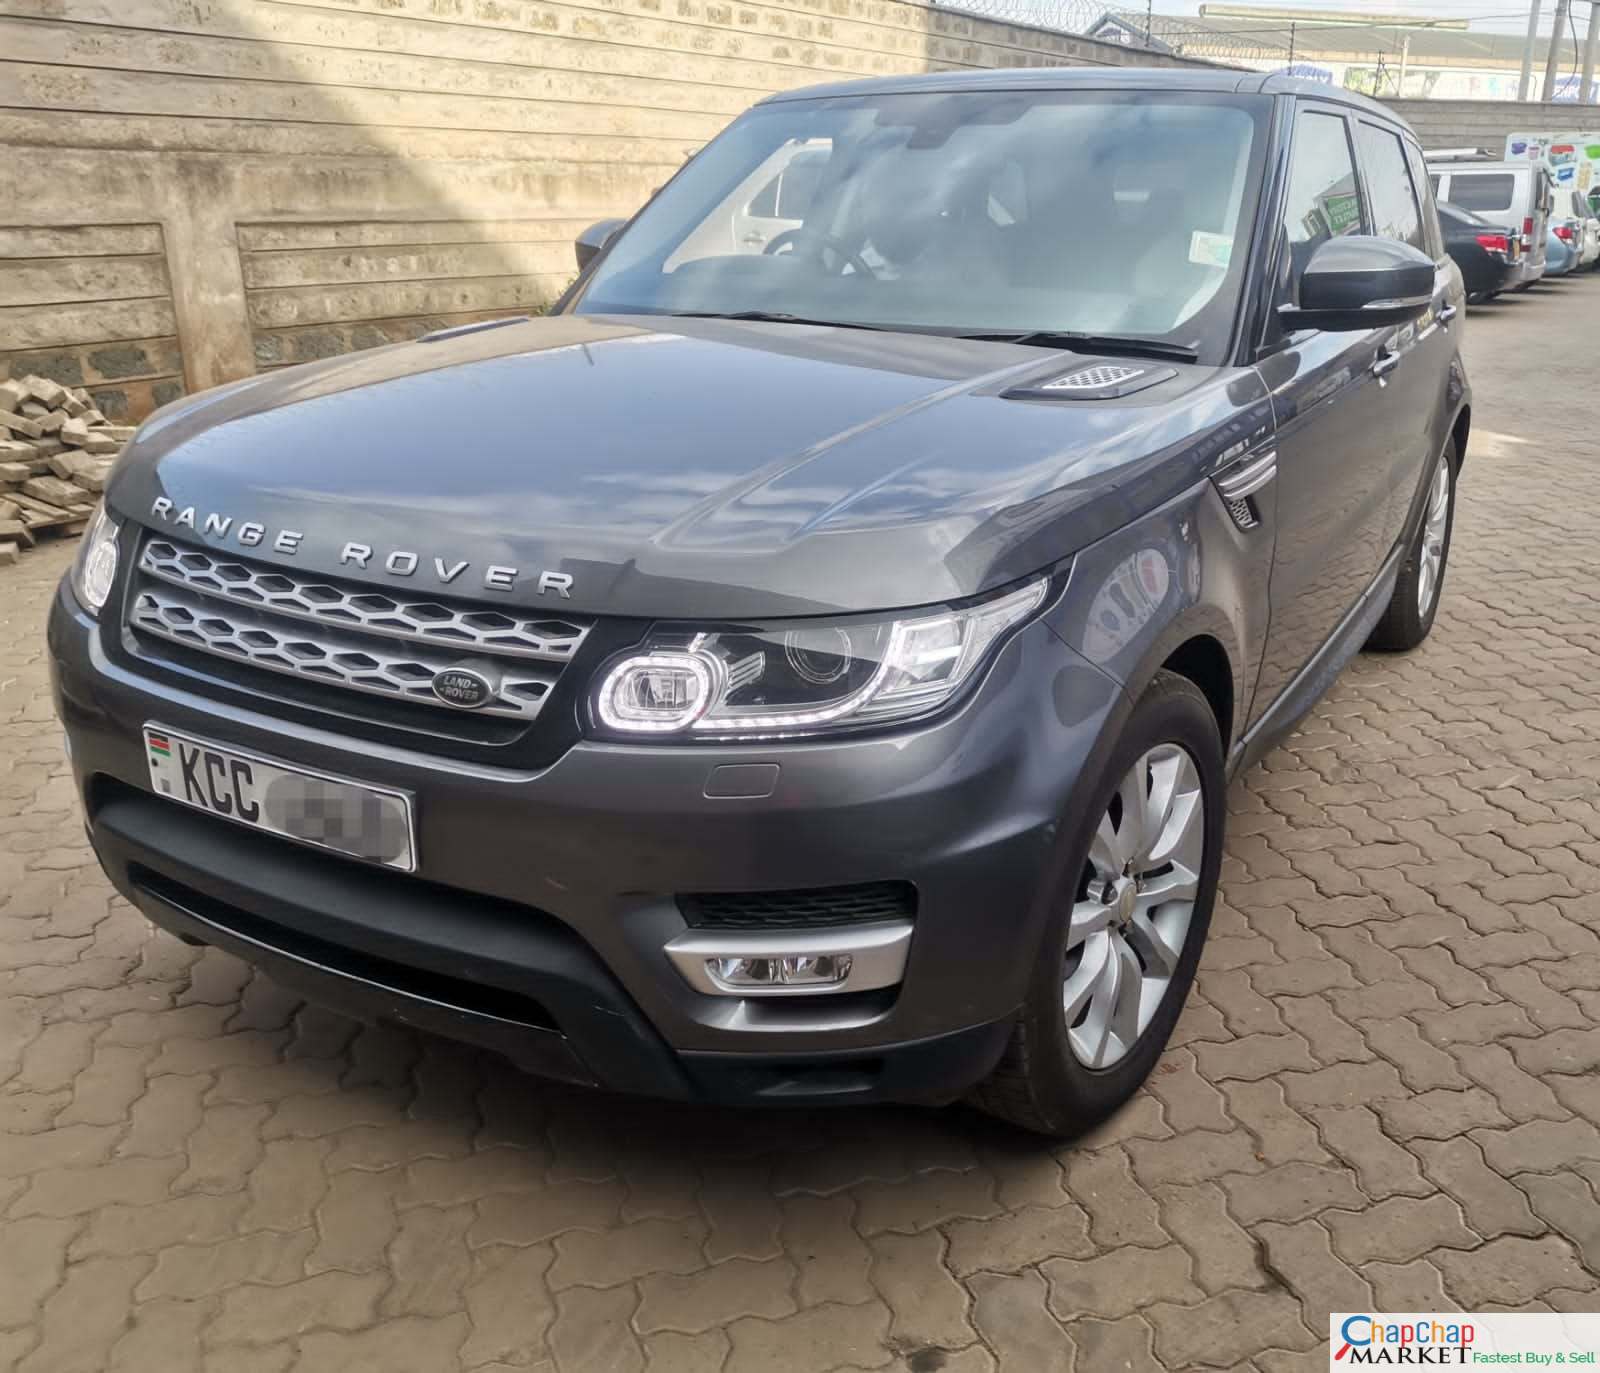 Cars Cars For Sale/Vehicles-Range Rover Sport for sale in Kenya LOCAL ASSEMBLY You pay 30% deposit Trade in OK EXCLUSIVE 8